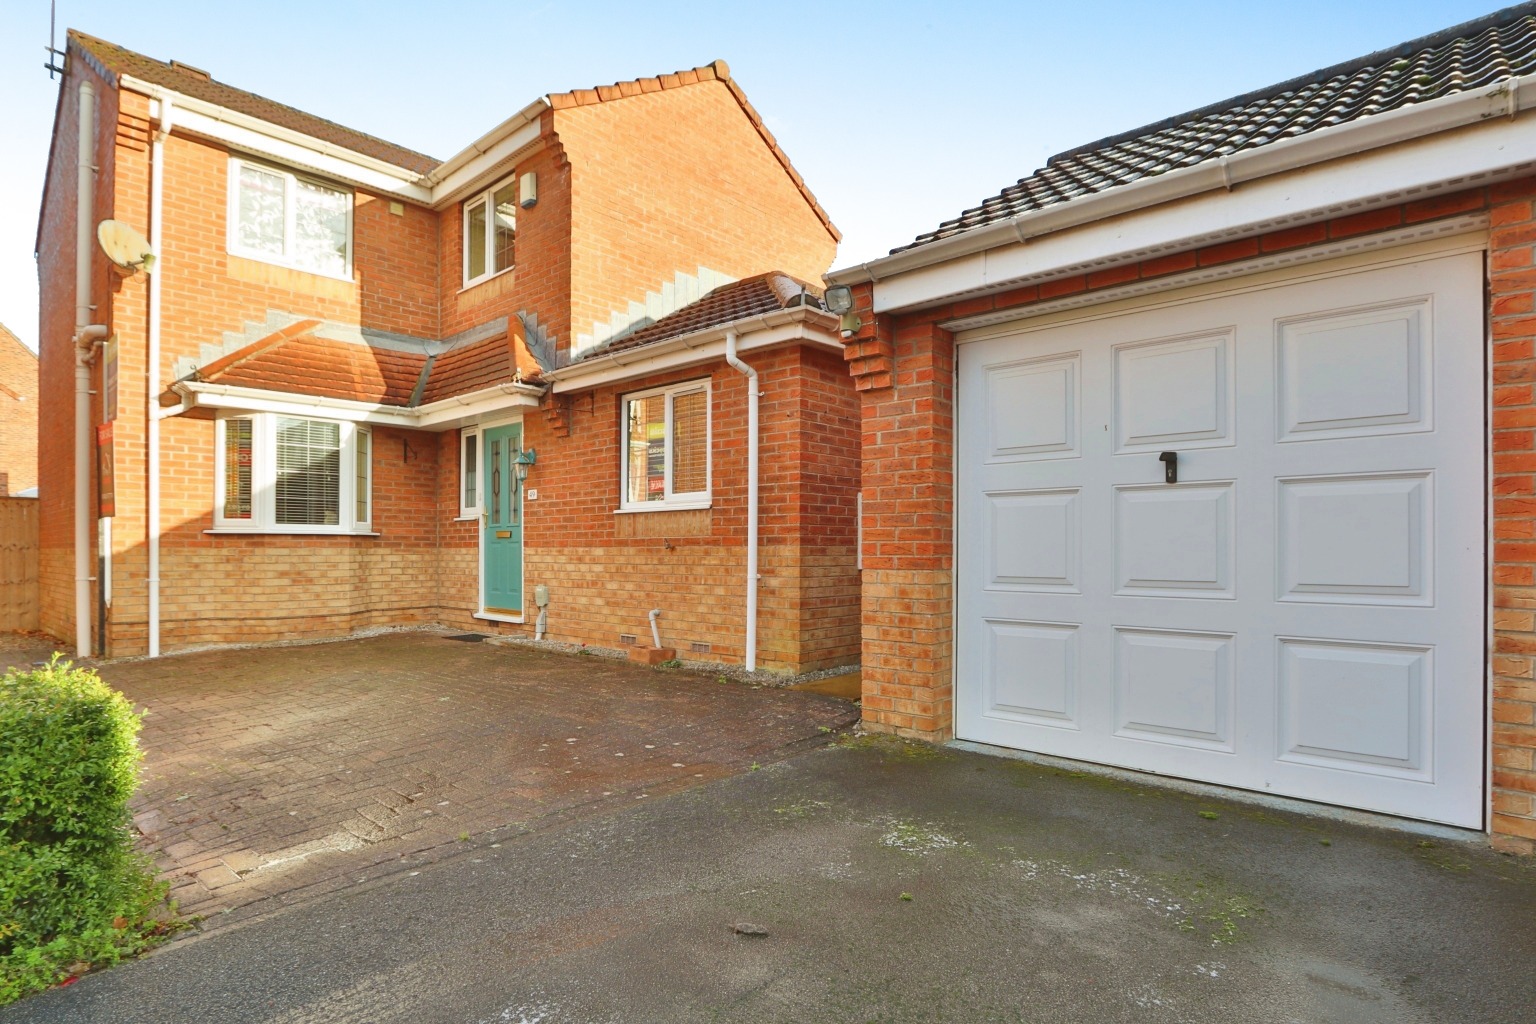 3 bed detached house for sale in Mill View Road, Beverley  - Property Image 1